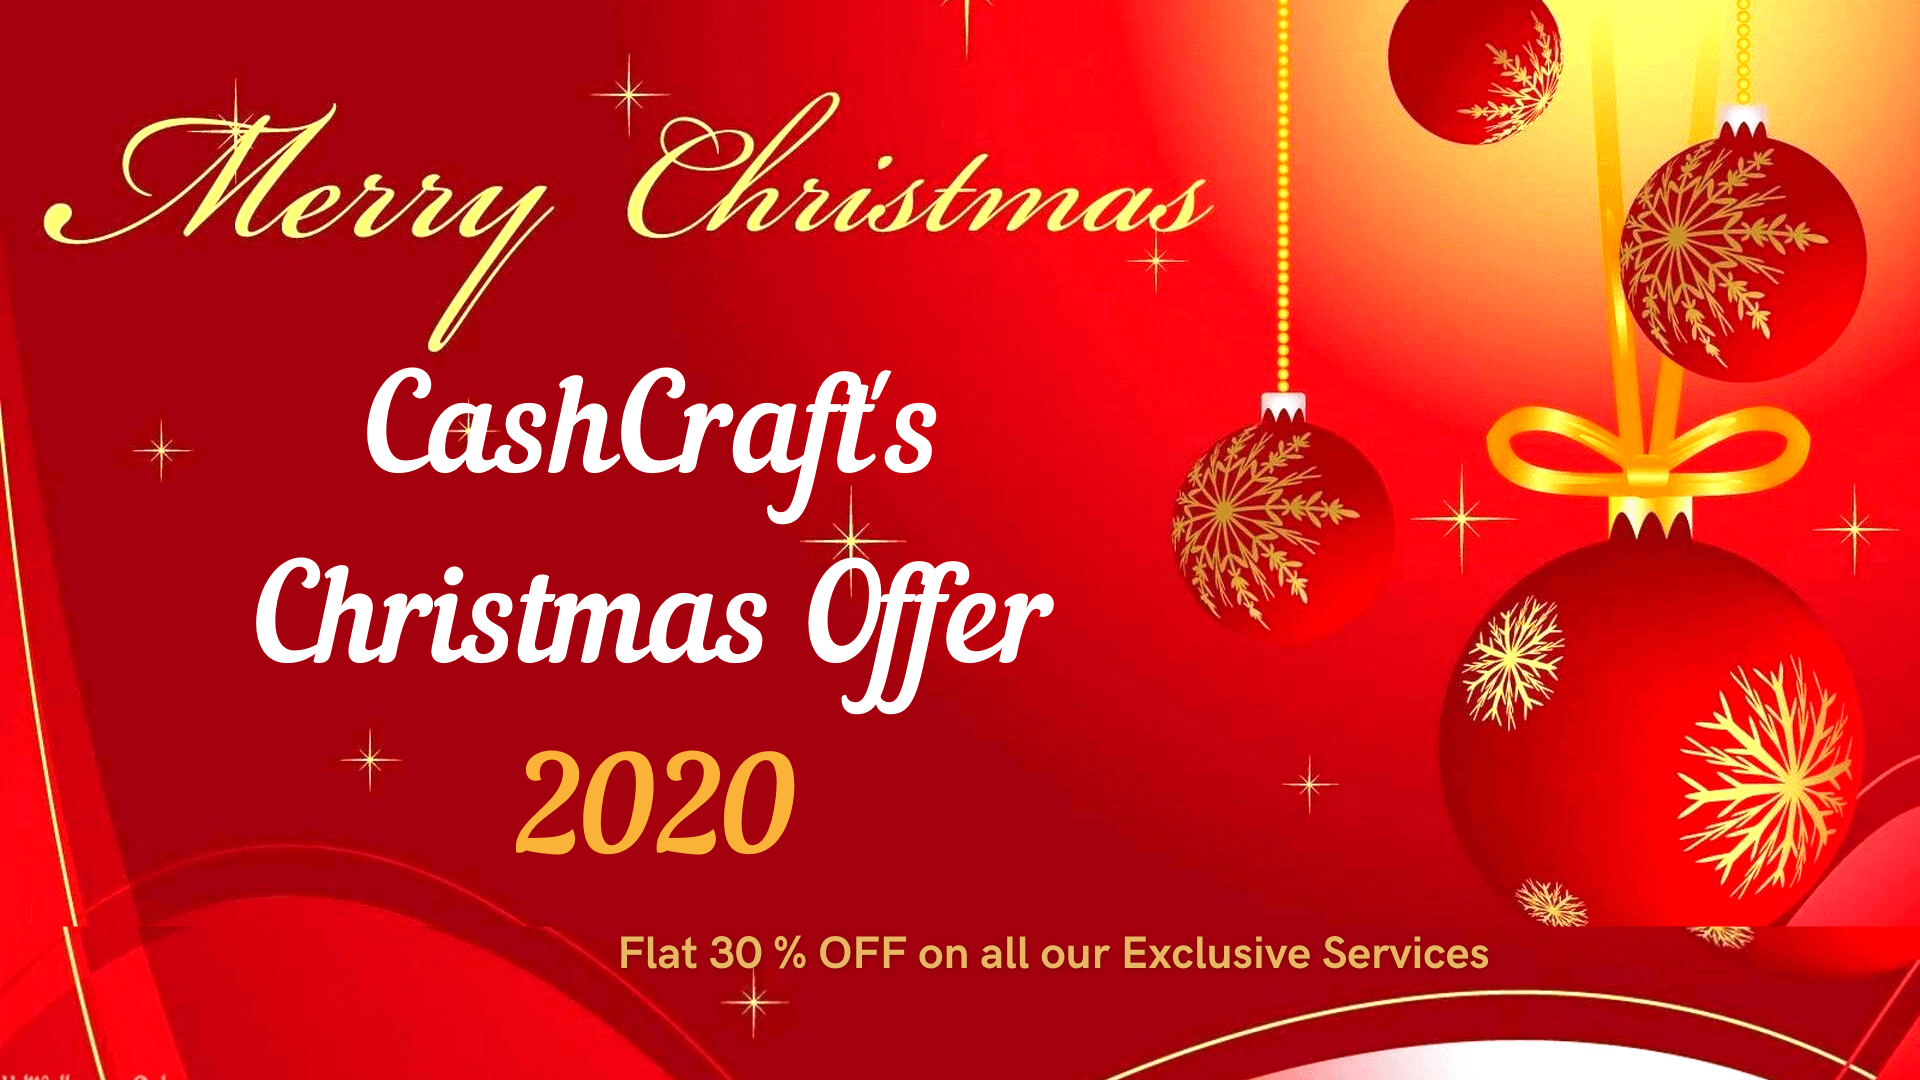 CashCraft’s Christmas Offers 2020 | Flat 30 % Off